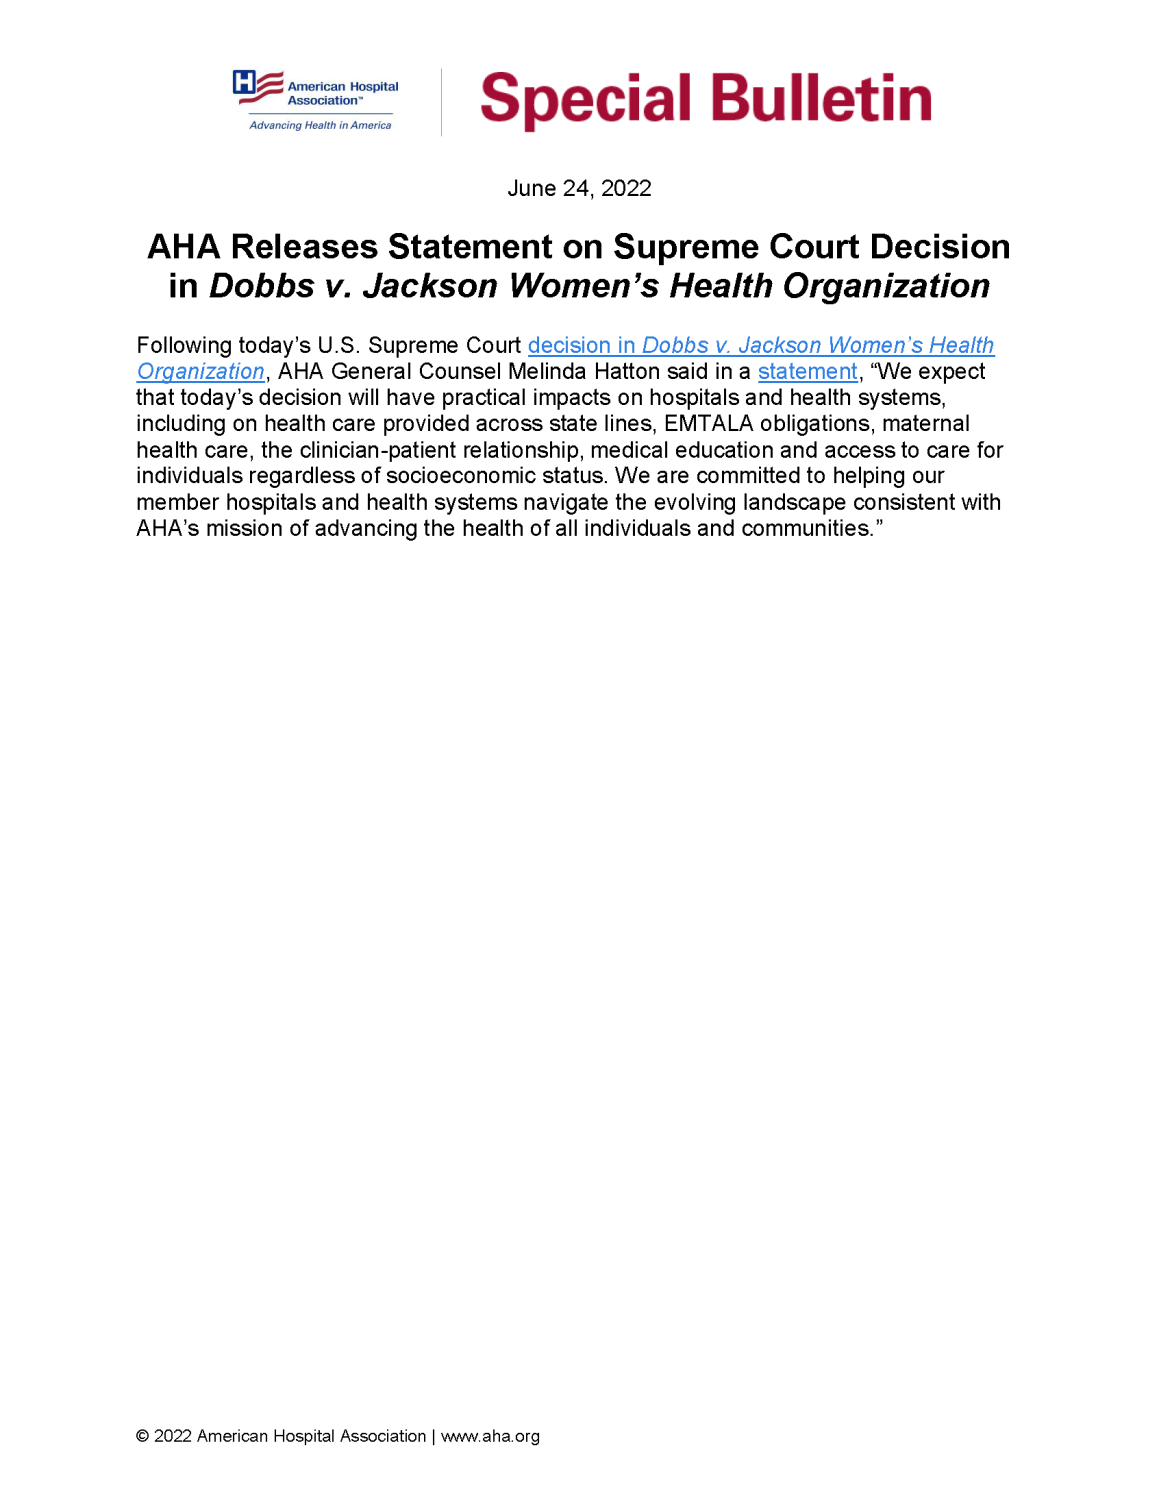 Special Bulletin: AHA Releases Statement on Supreme Court Decision in Dobbs v. Jackson Women's Health Organization. June 24, 2022.